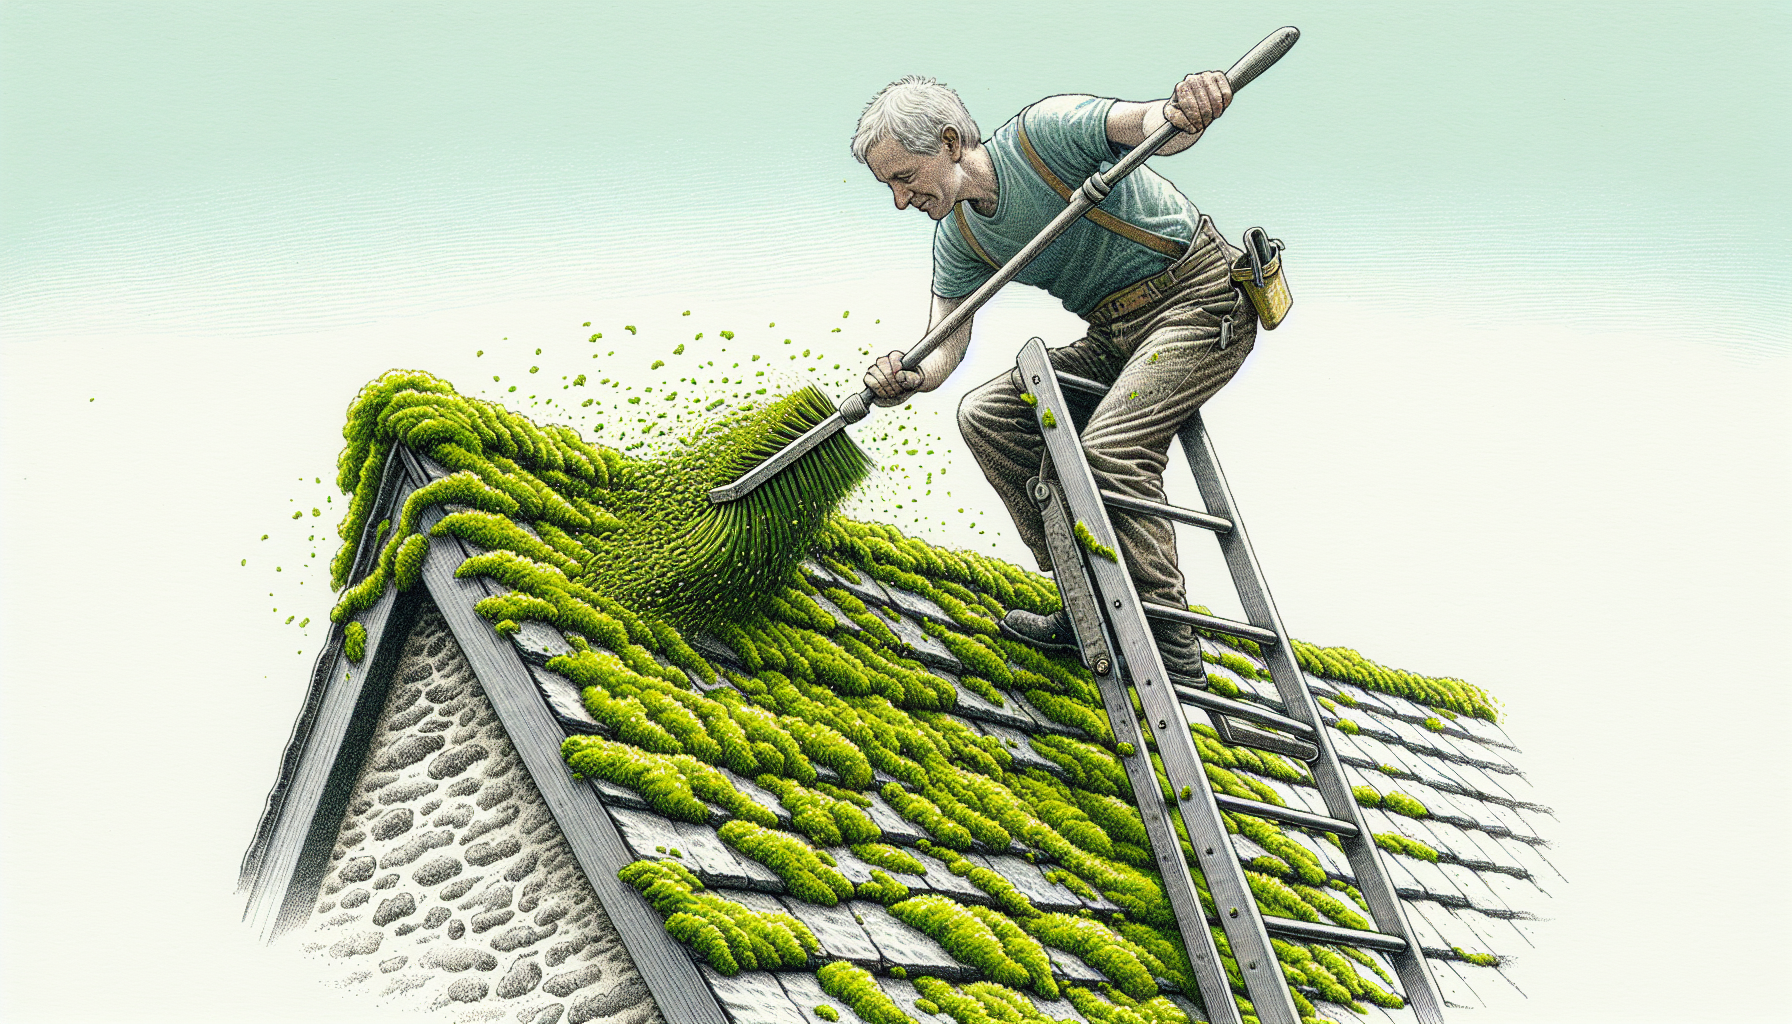 Illustration of brushing off loose moss from a roof